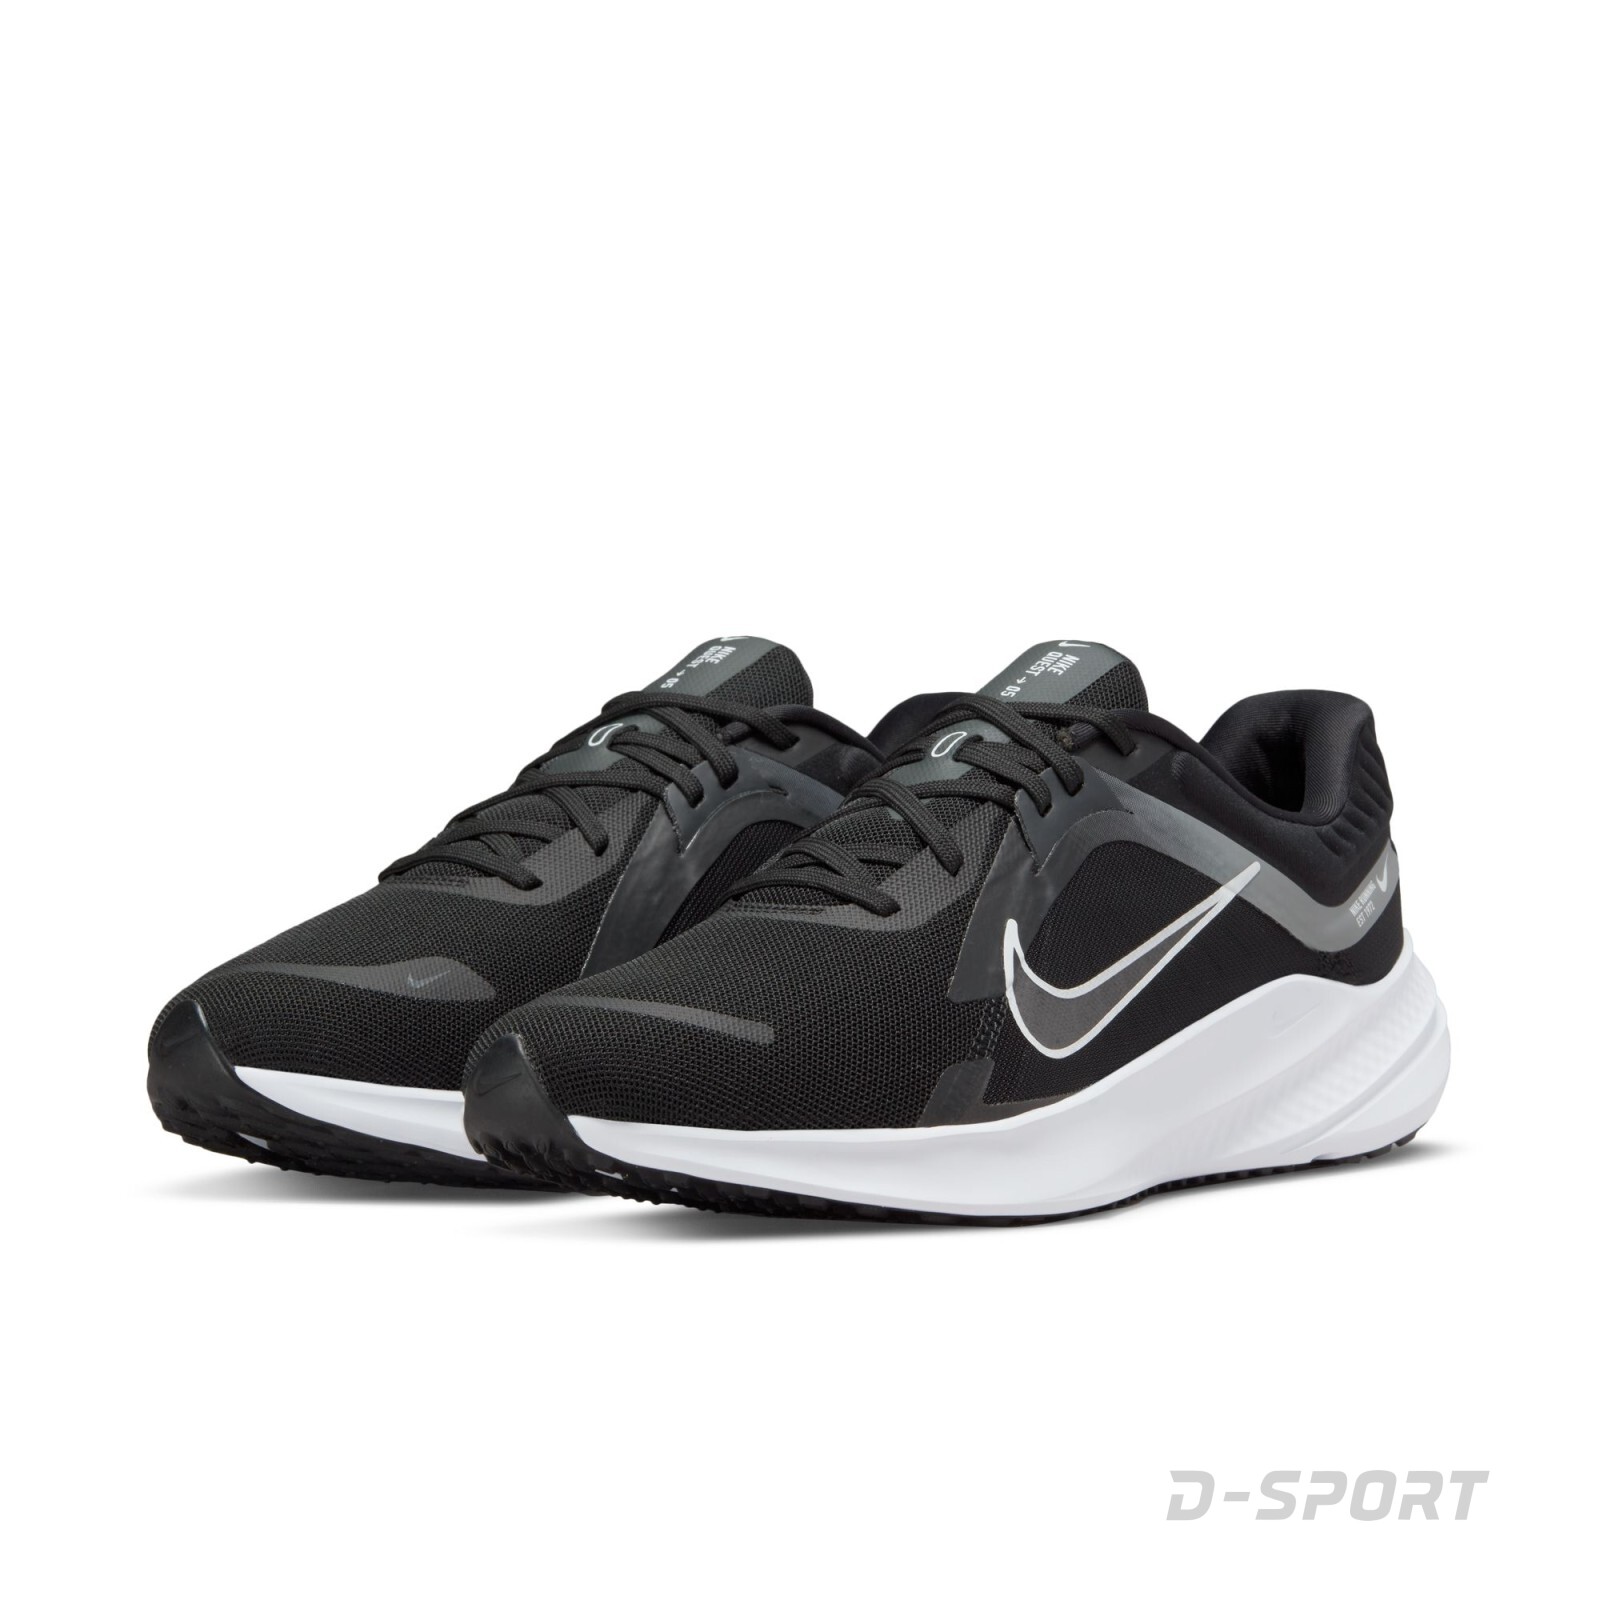 NIKE QUEST 9